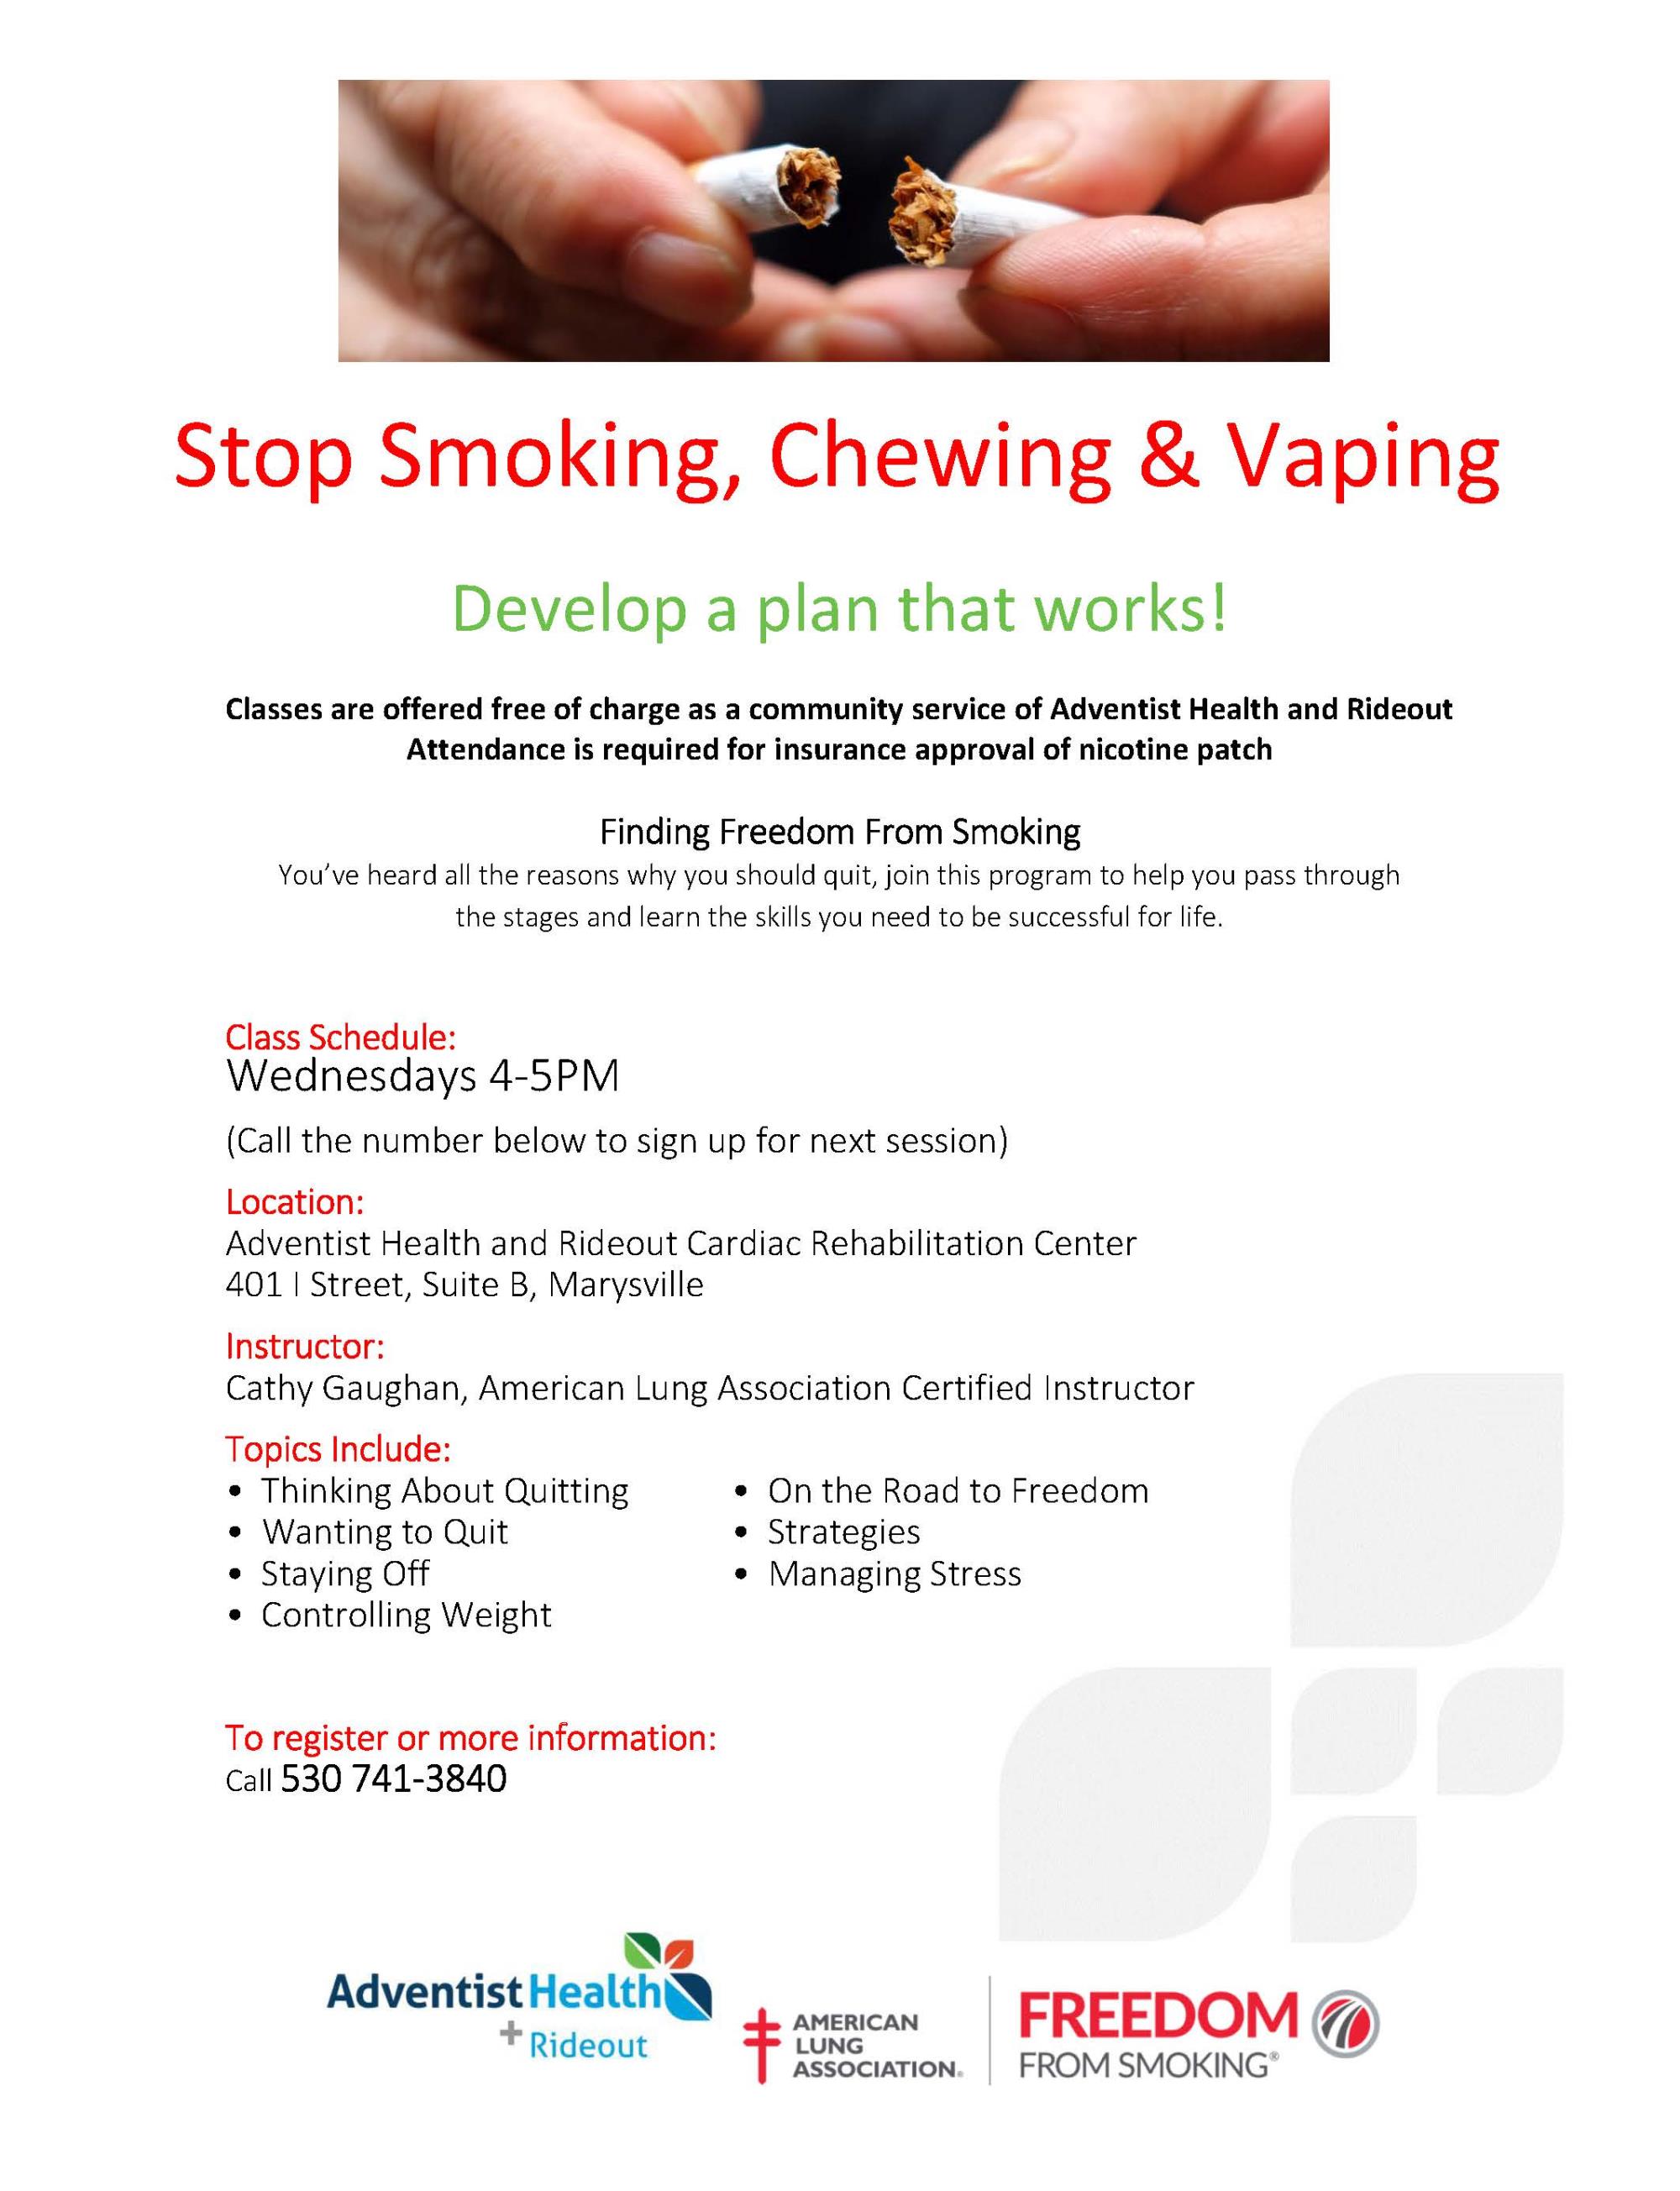 Stop Smoking Chewing Vaping Adventist Health and Rideout